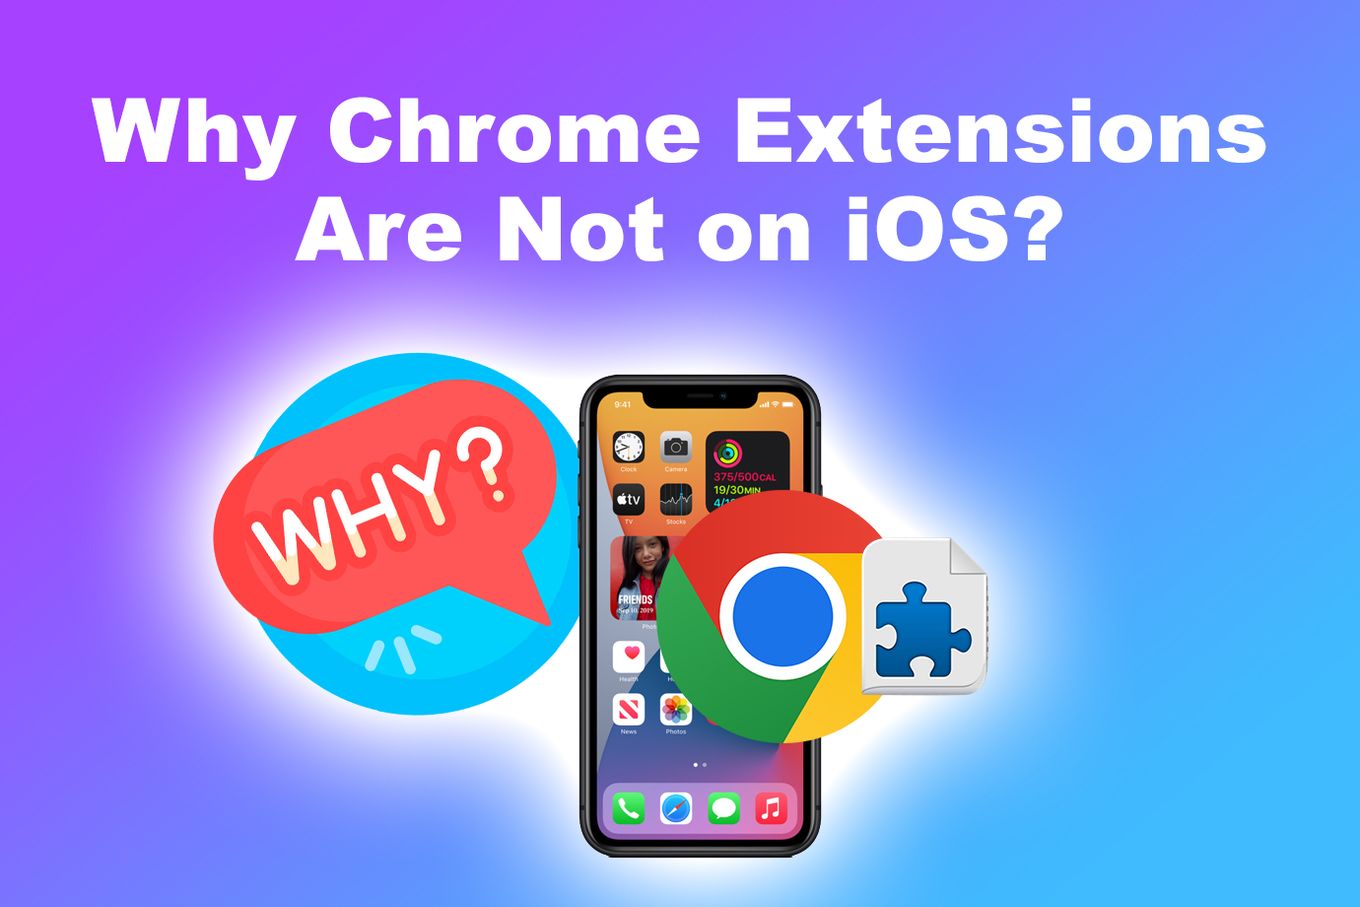 Why Chrome Extensions Are Not on iOS?